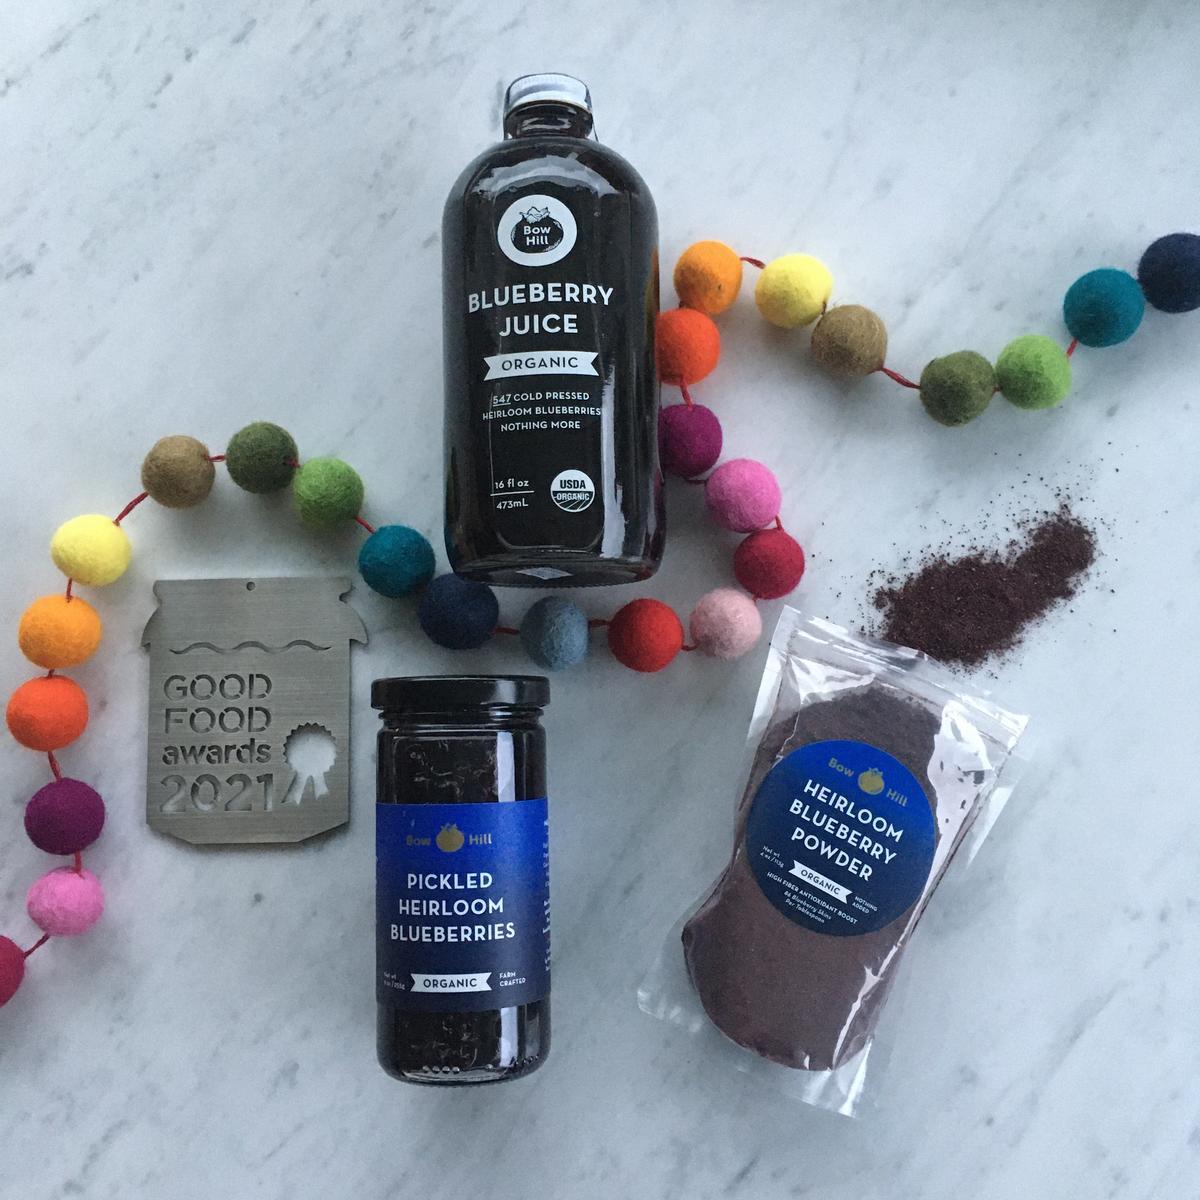 Bow Hill's Organic Blueberry Juice, Organic Heirloom Pickled Blueberries, and Organic Heirloom Blueberry Powder. The juice and pickled blueberries are 2021 Good Food Awards winners. (Courtesy of Bow Hill Blueberries)